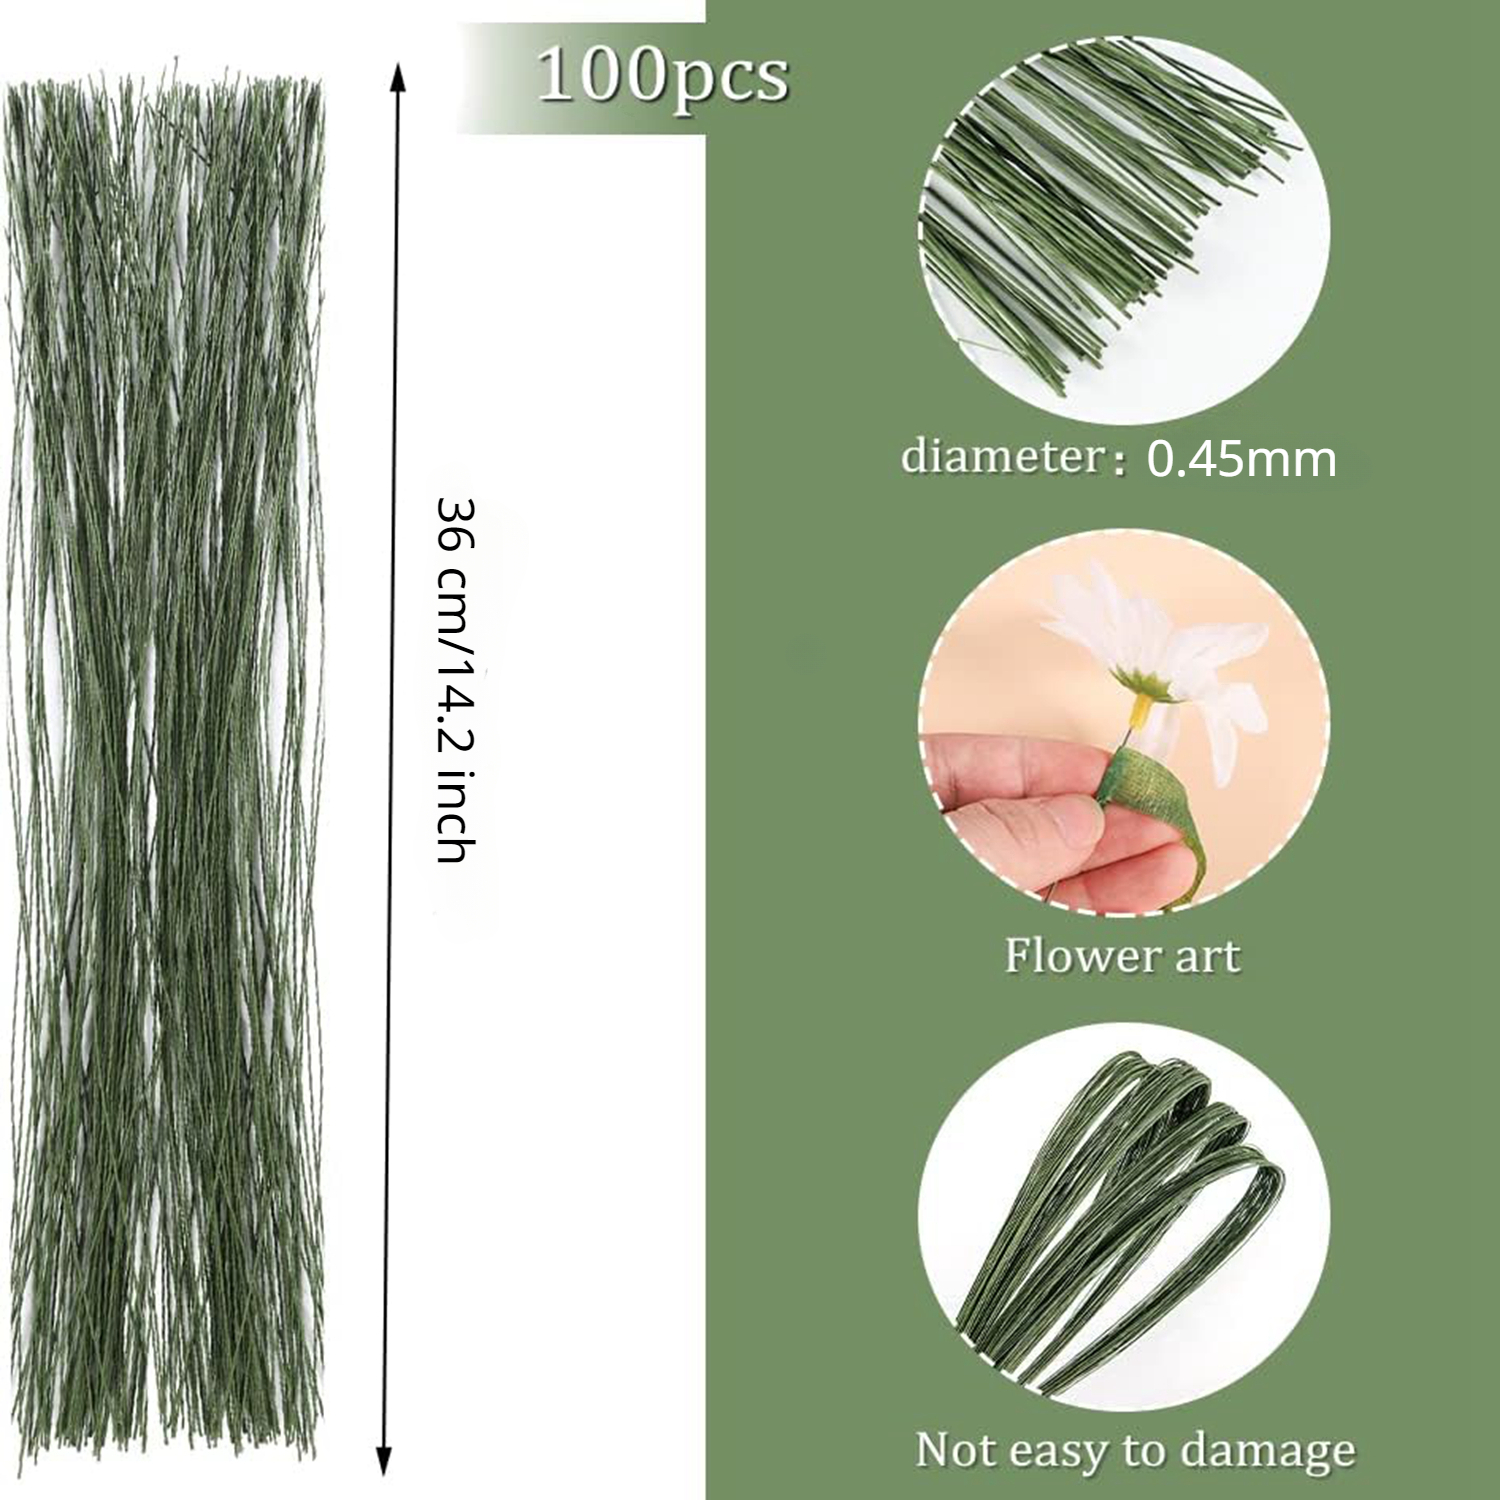  YOLUFER 100Pcs Floral Wire Stems Plastic Artificial Flower for  Craft Floral Green Stem Wire DIY Craft Bouquet Making Floral Arrangement  Tools : Arts, Crafts & Sewing